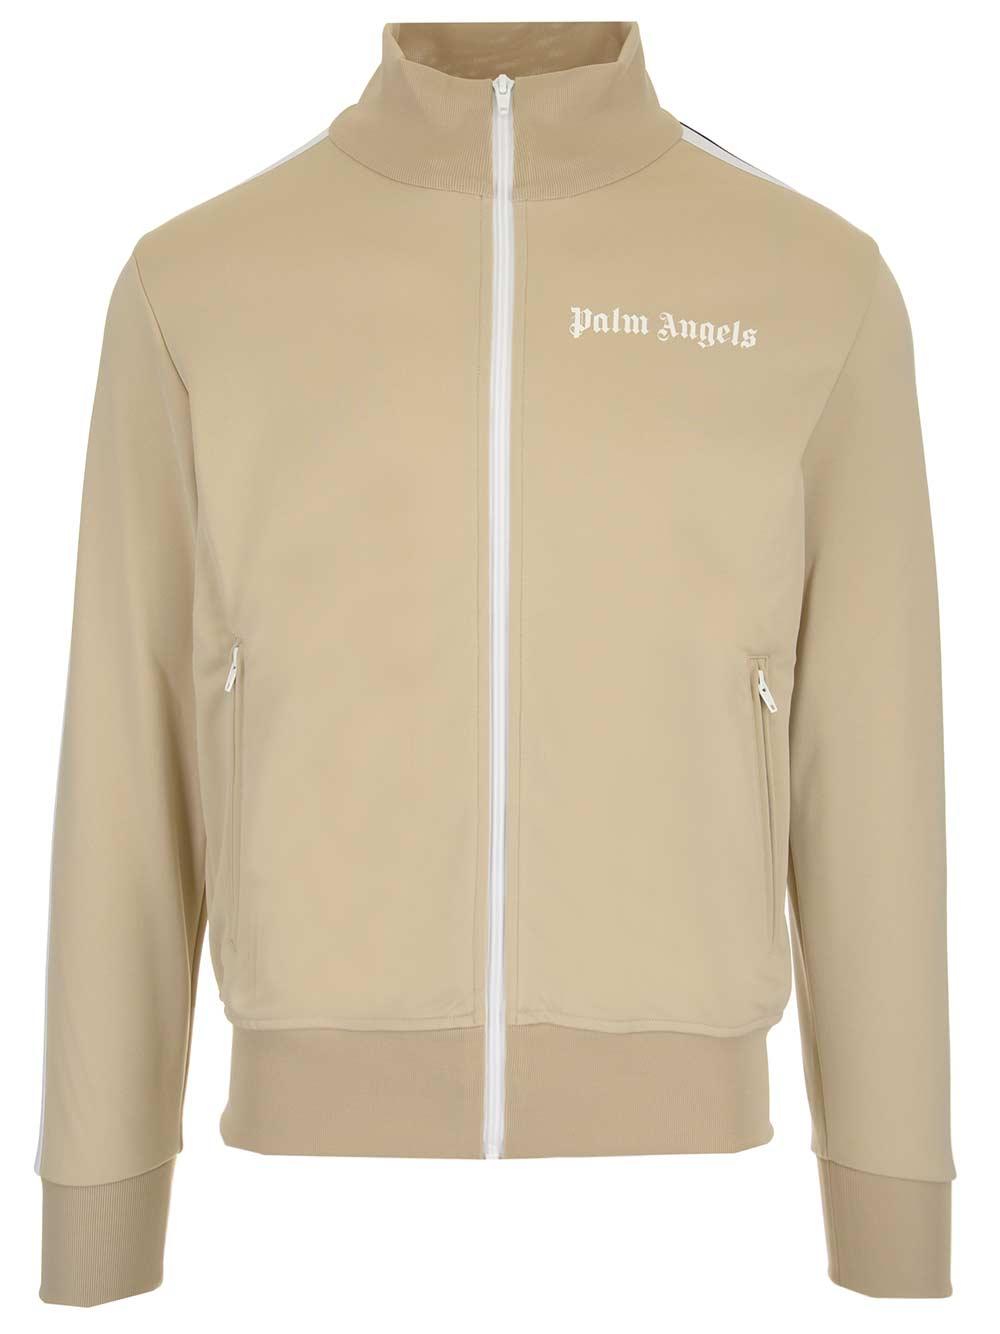 Palm Angels Synthetic Logo Track Jacket in Beige (Natural) for Men - Lyst